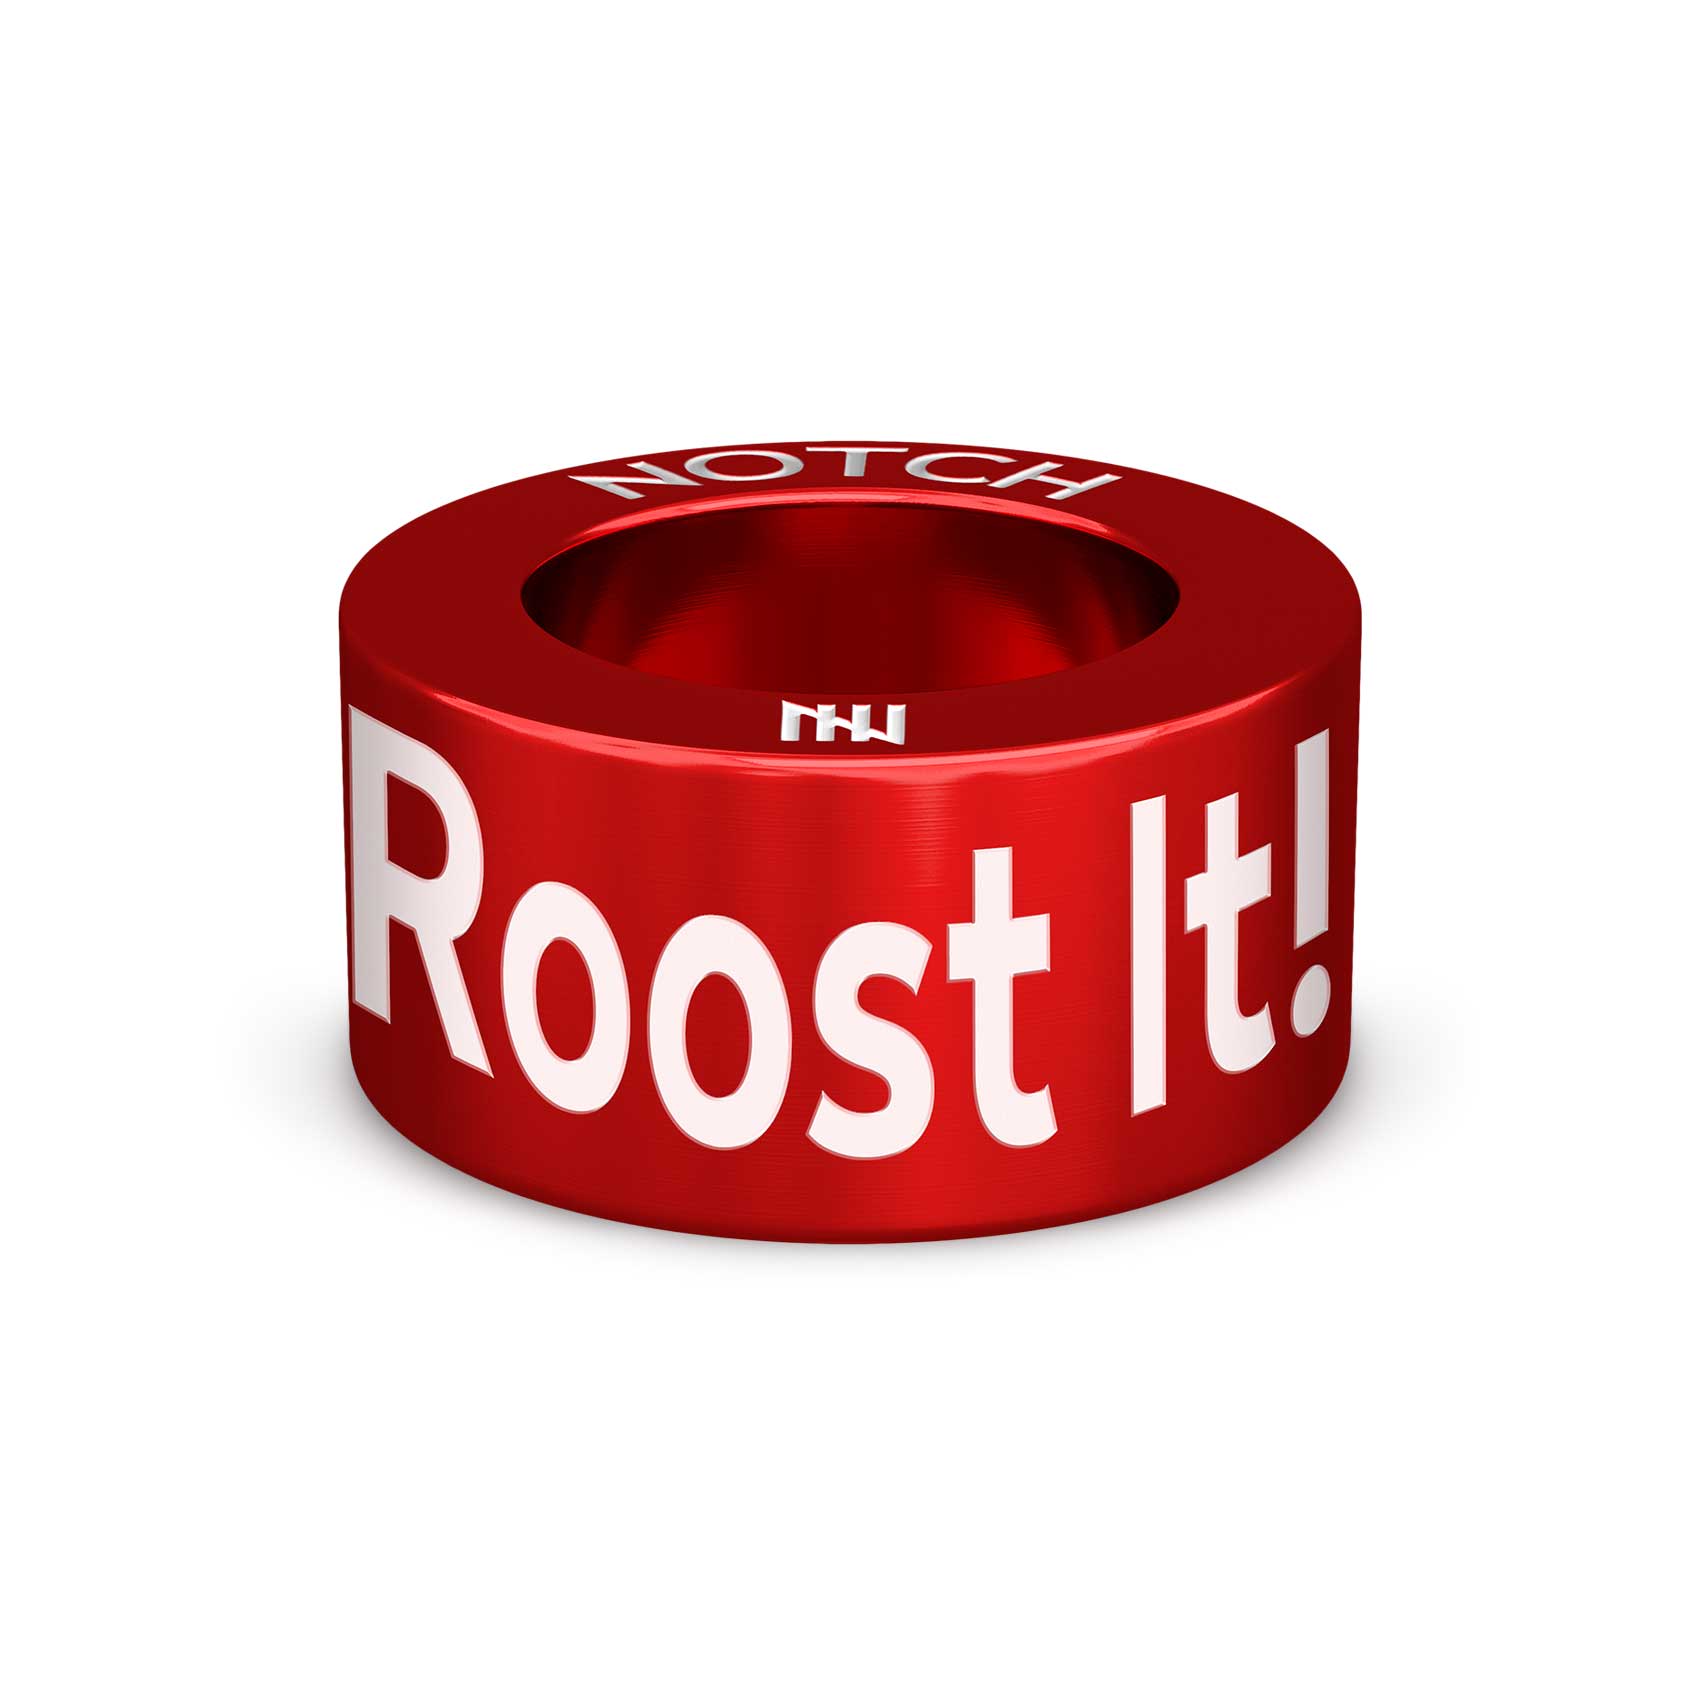 Roost It! by Cobbs